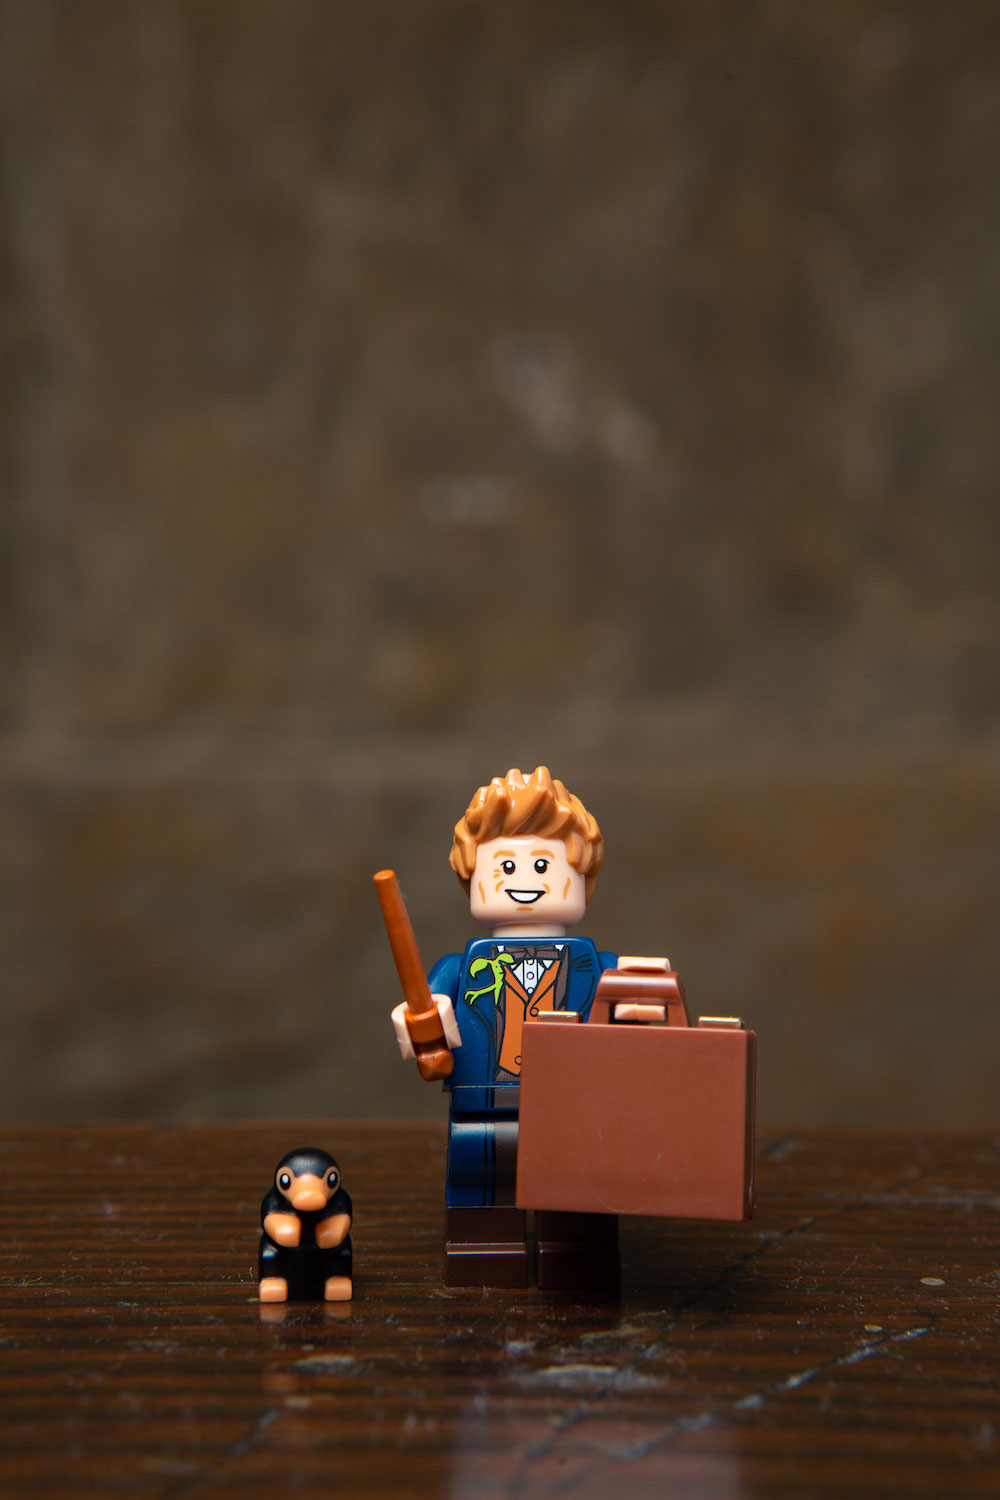 Newt’s LEGO minifigure includes his iconic briefcase and his troublesome Niffler friend. ;)